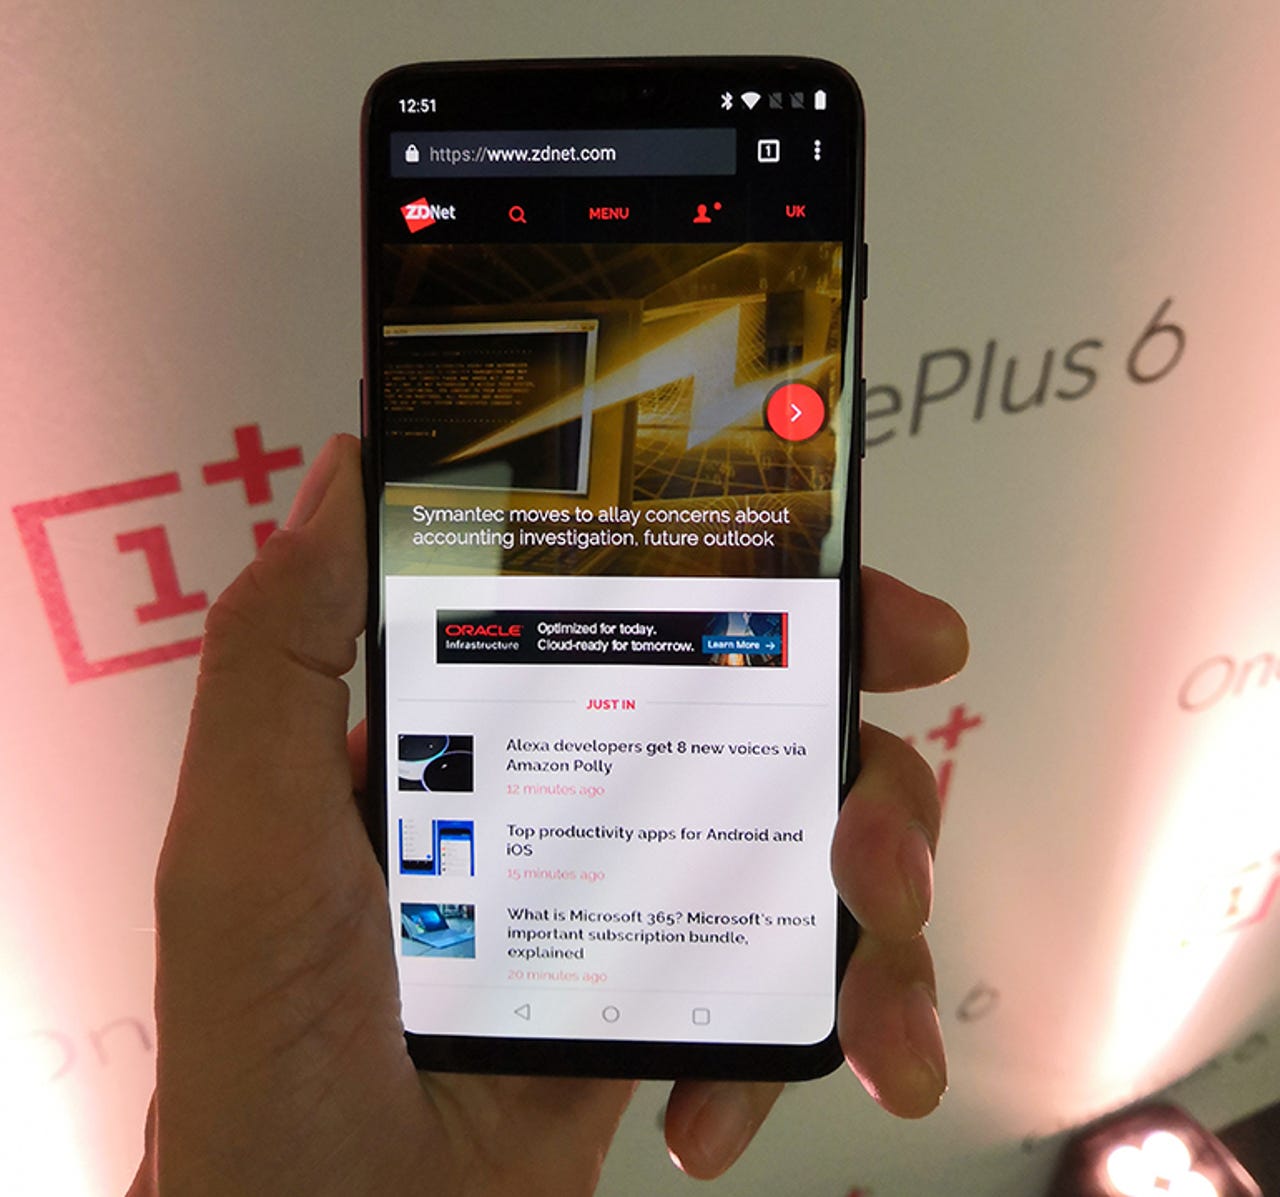 oneplus-6-launch-front.jpg